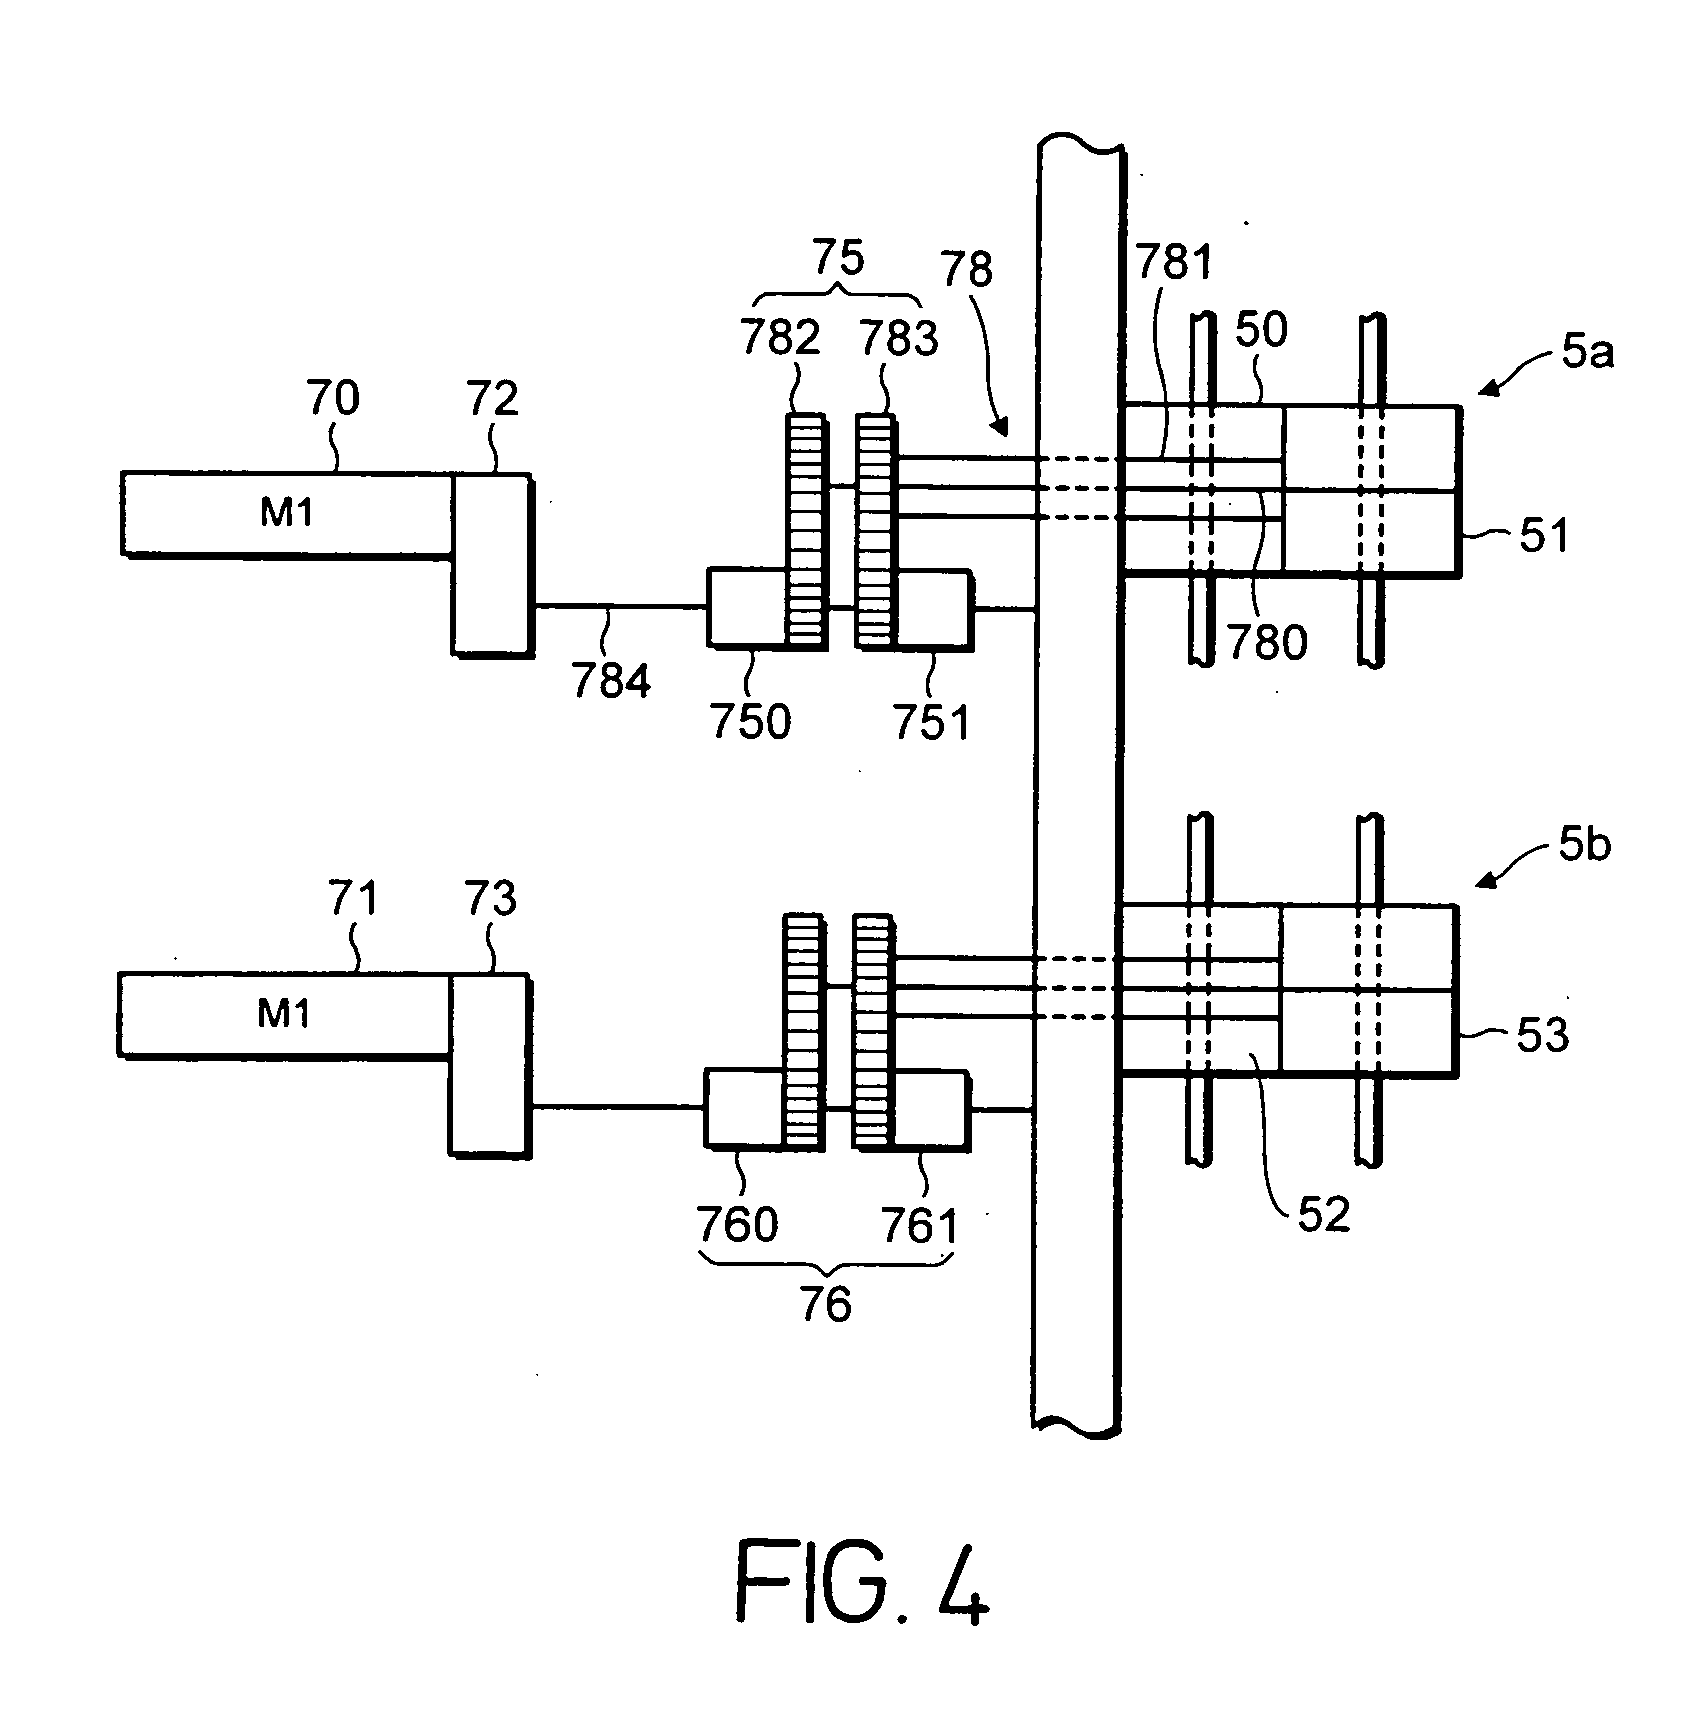 Device and method for on-demand dispensing of spoonable or drinkable food products having visual appearance of multi-components